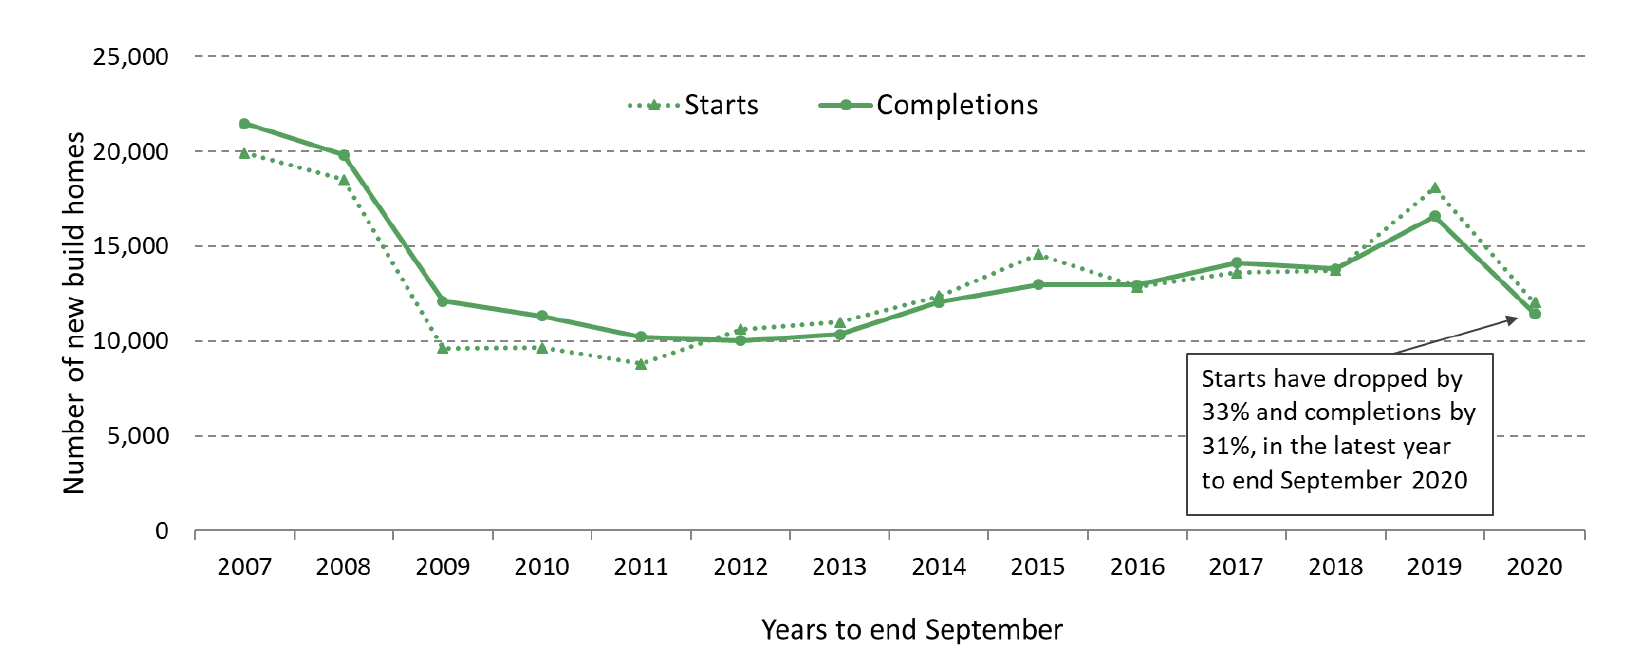 Annual private sector led new build starts and completions in the years to end June from 2007 to 2020